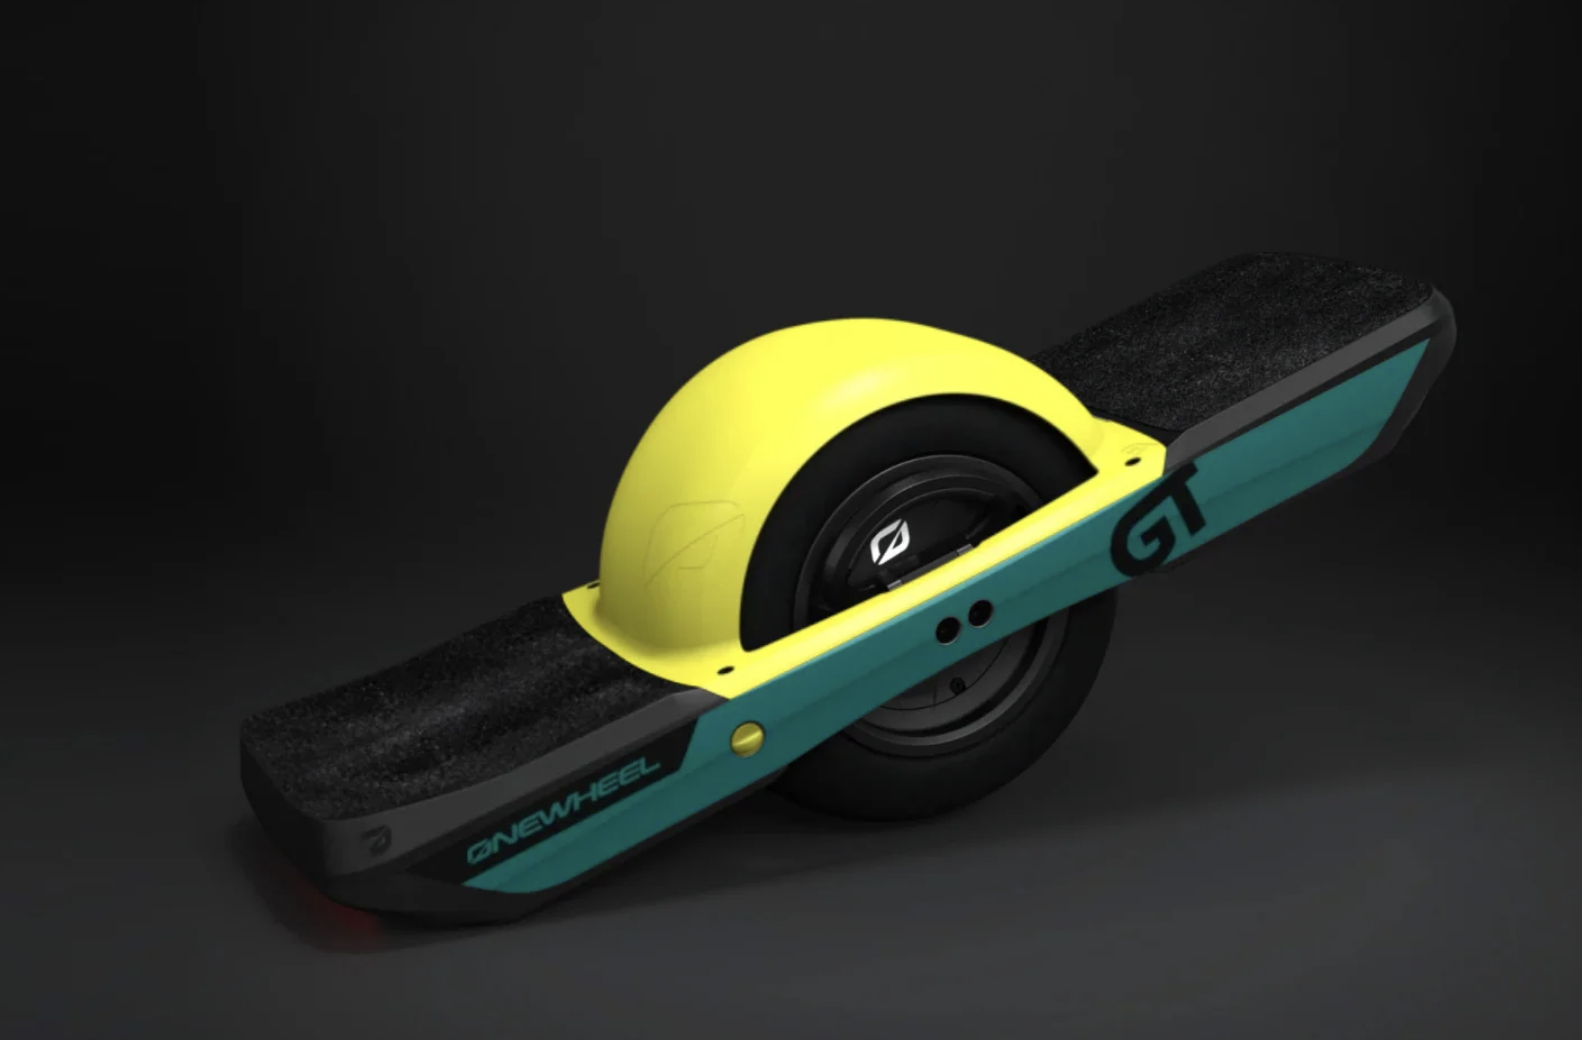 A skateboard-looking device with one small wheel under it